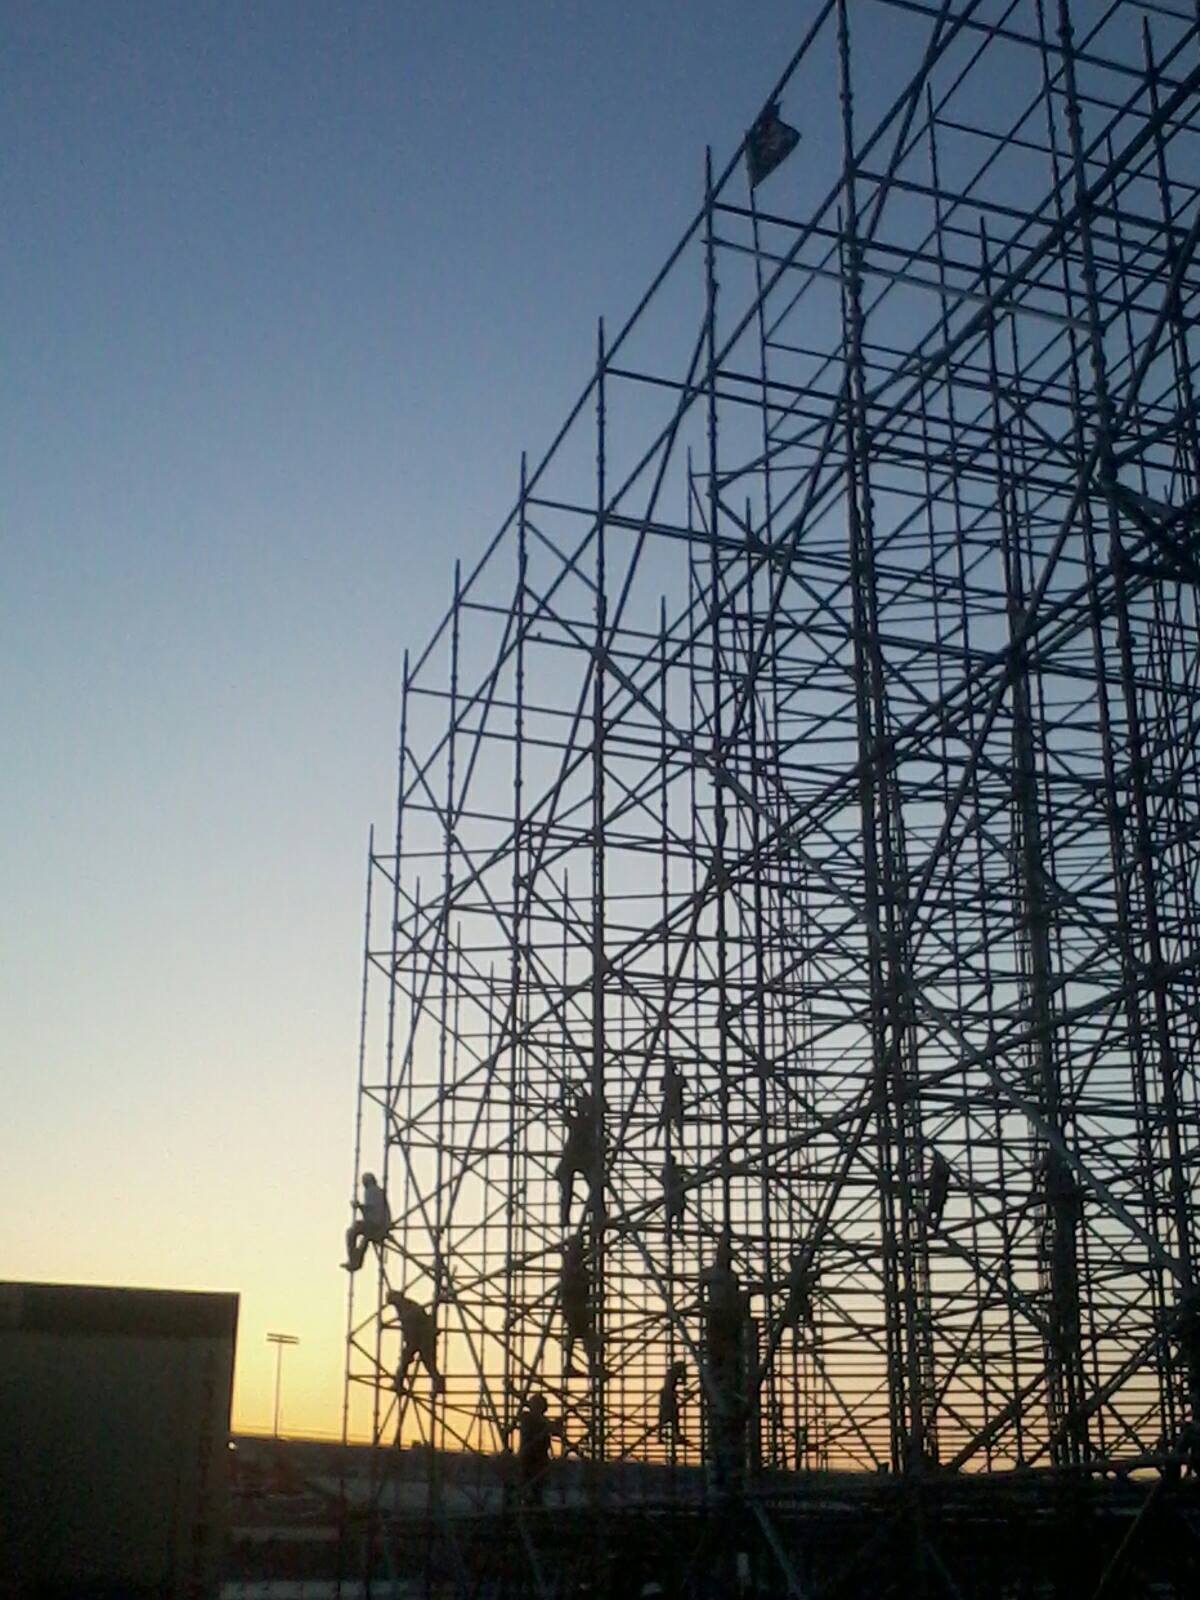 One of the Largest Scaffolding Systems in US History